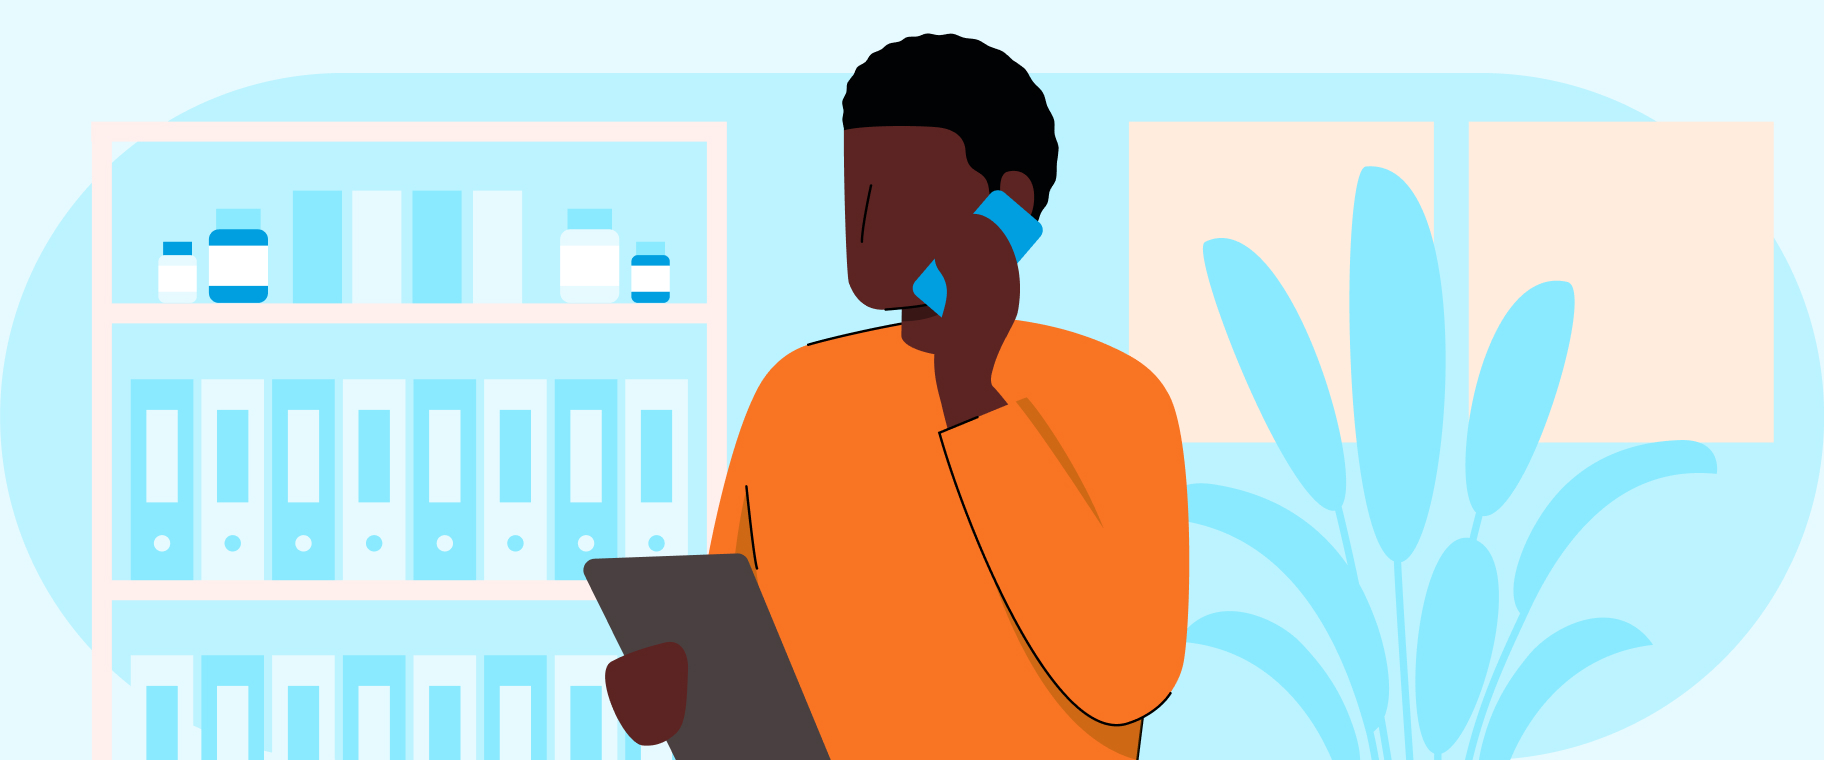 Illustrated image of a man talking on a phone holding a tablet